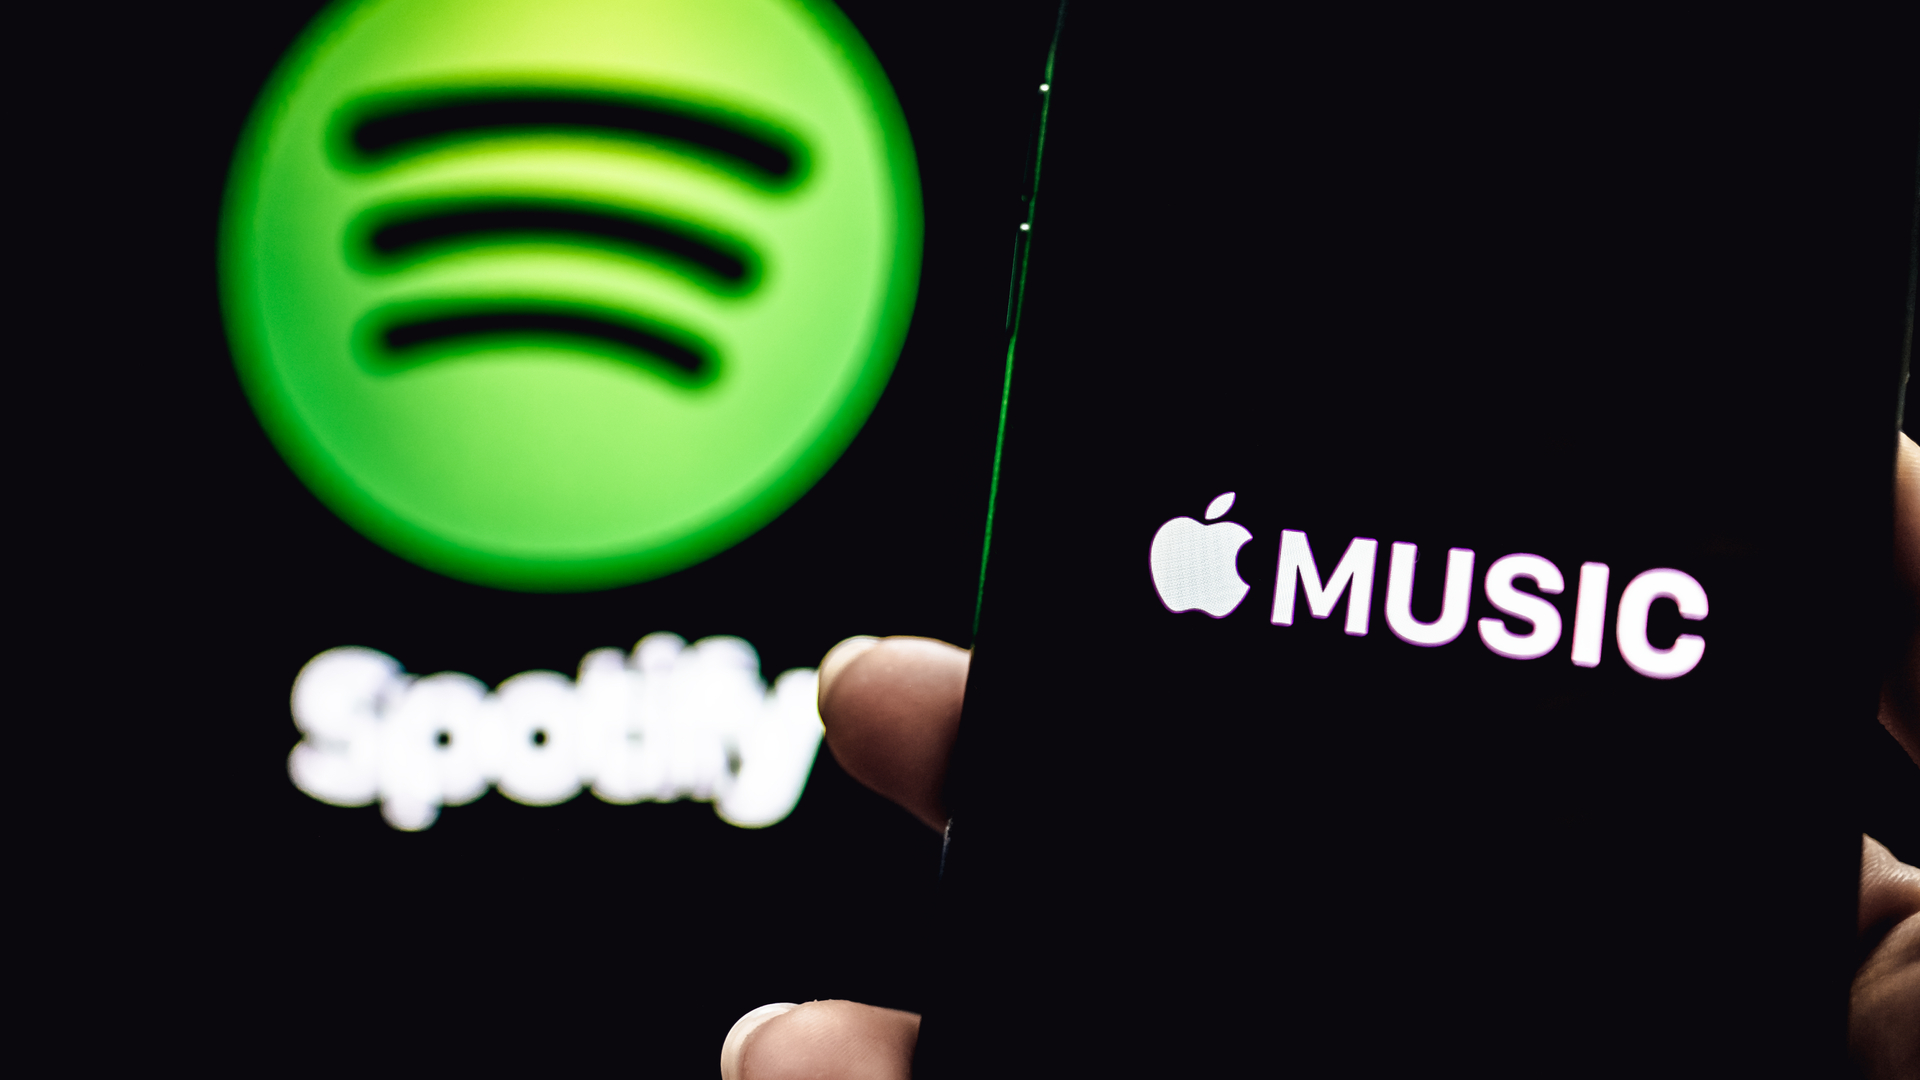 a spotify logo and an apple music logo on smartphones